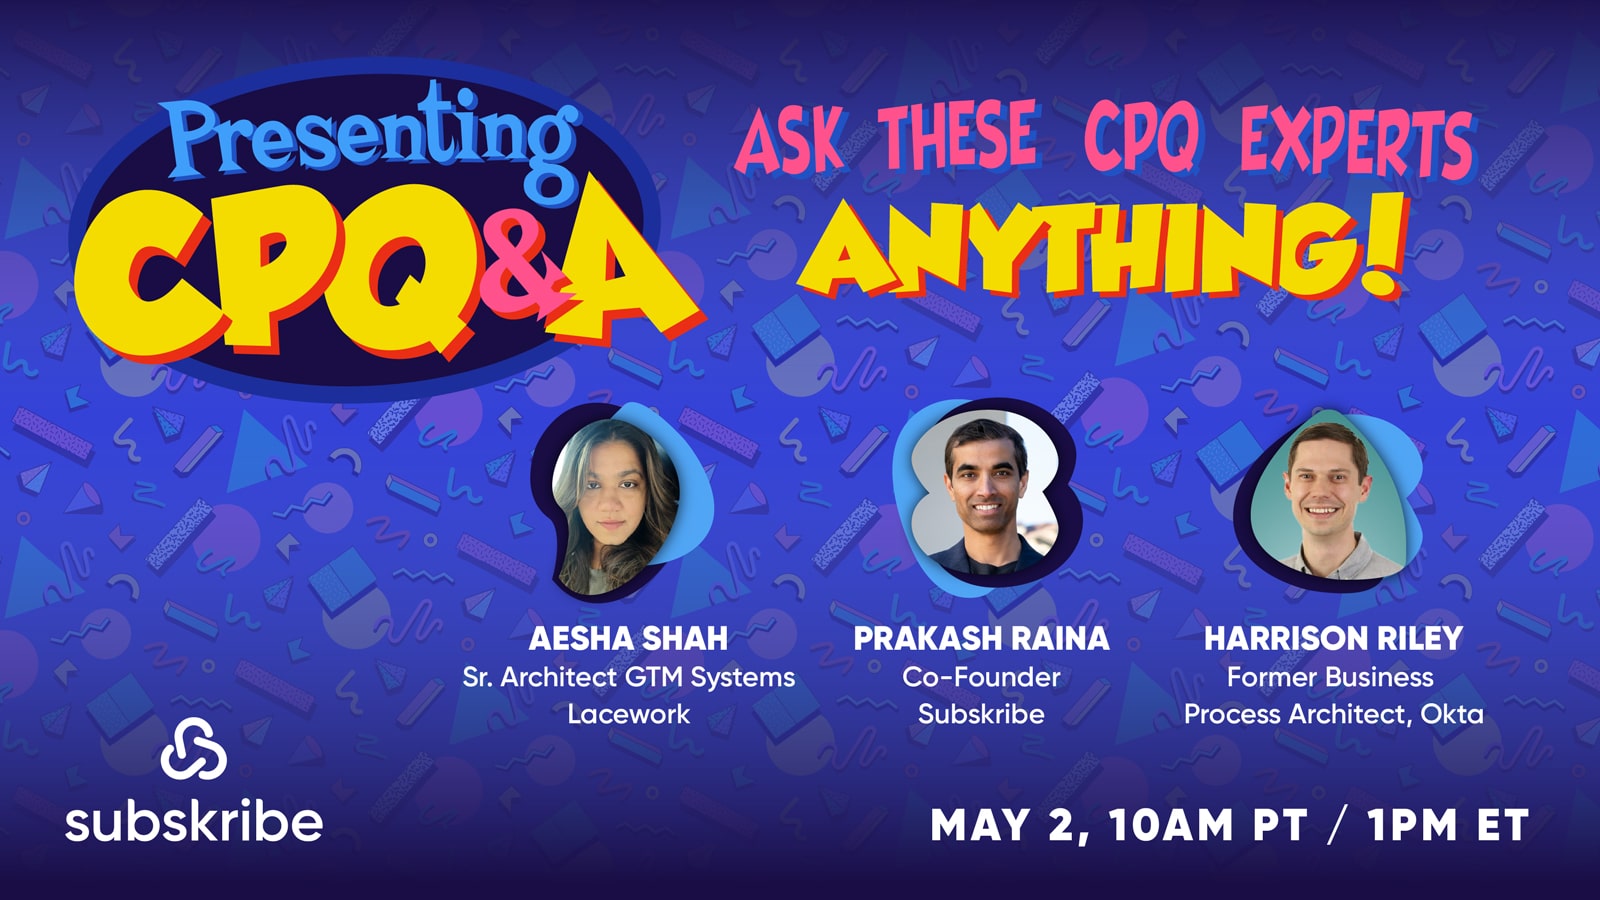 CPQ&A: Ask These CPQ Experts Anything!